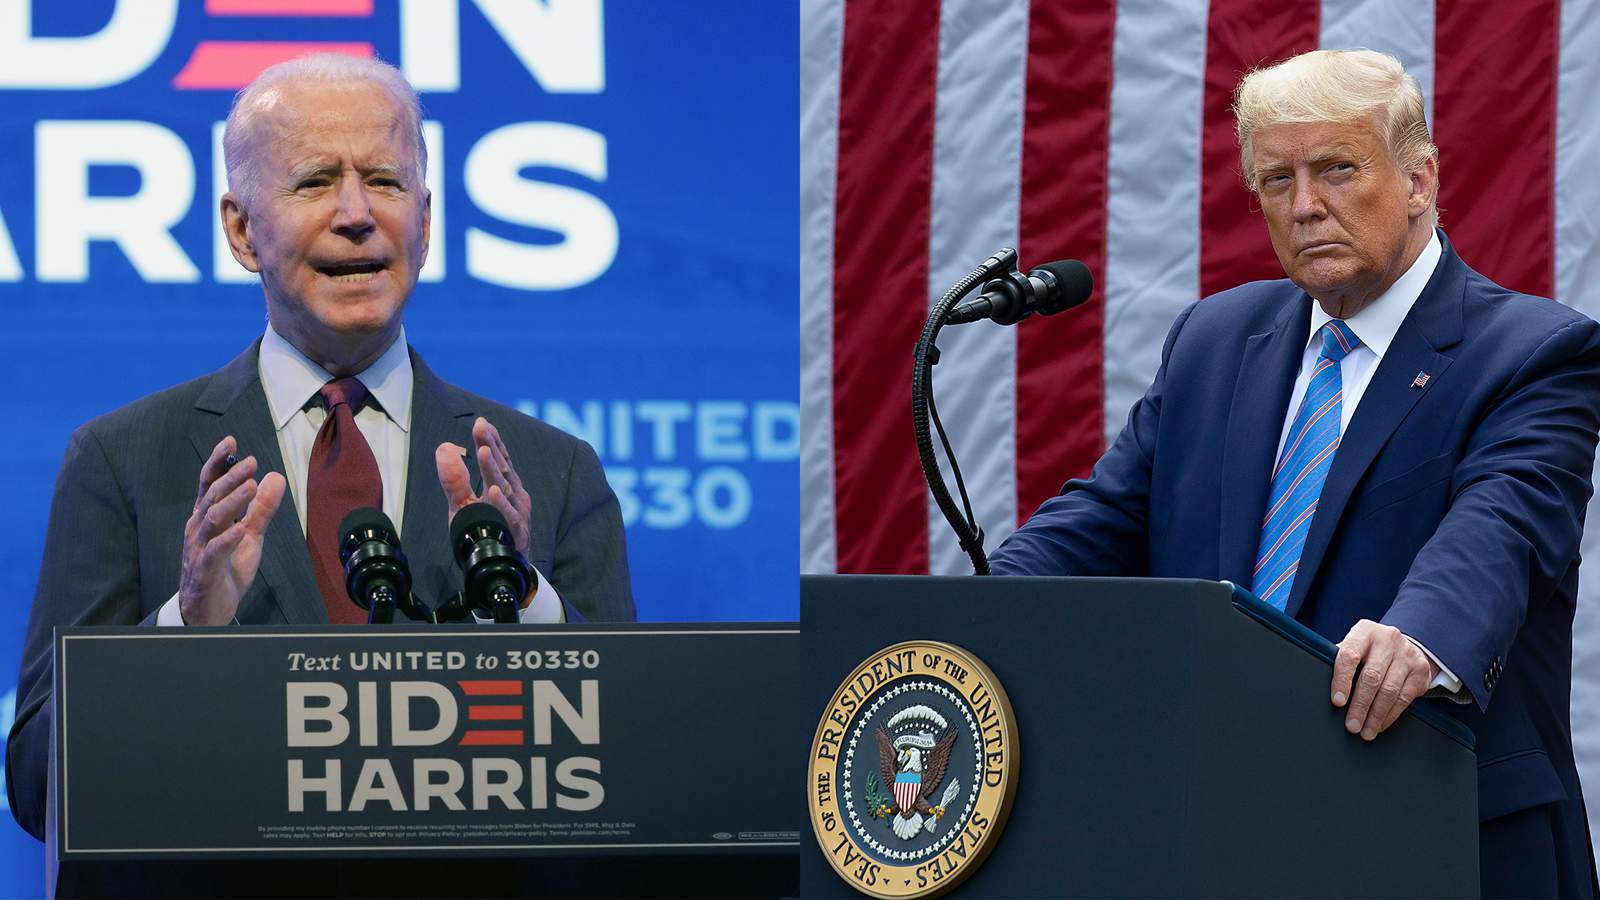 LIVE COVERAGE: Trump, Biden in first Presidential Debate of 2020 election